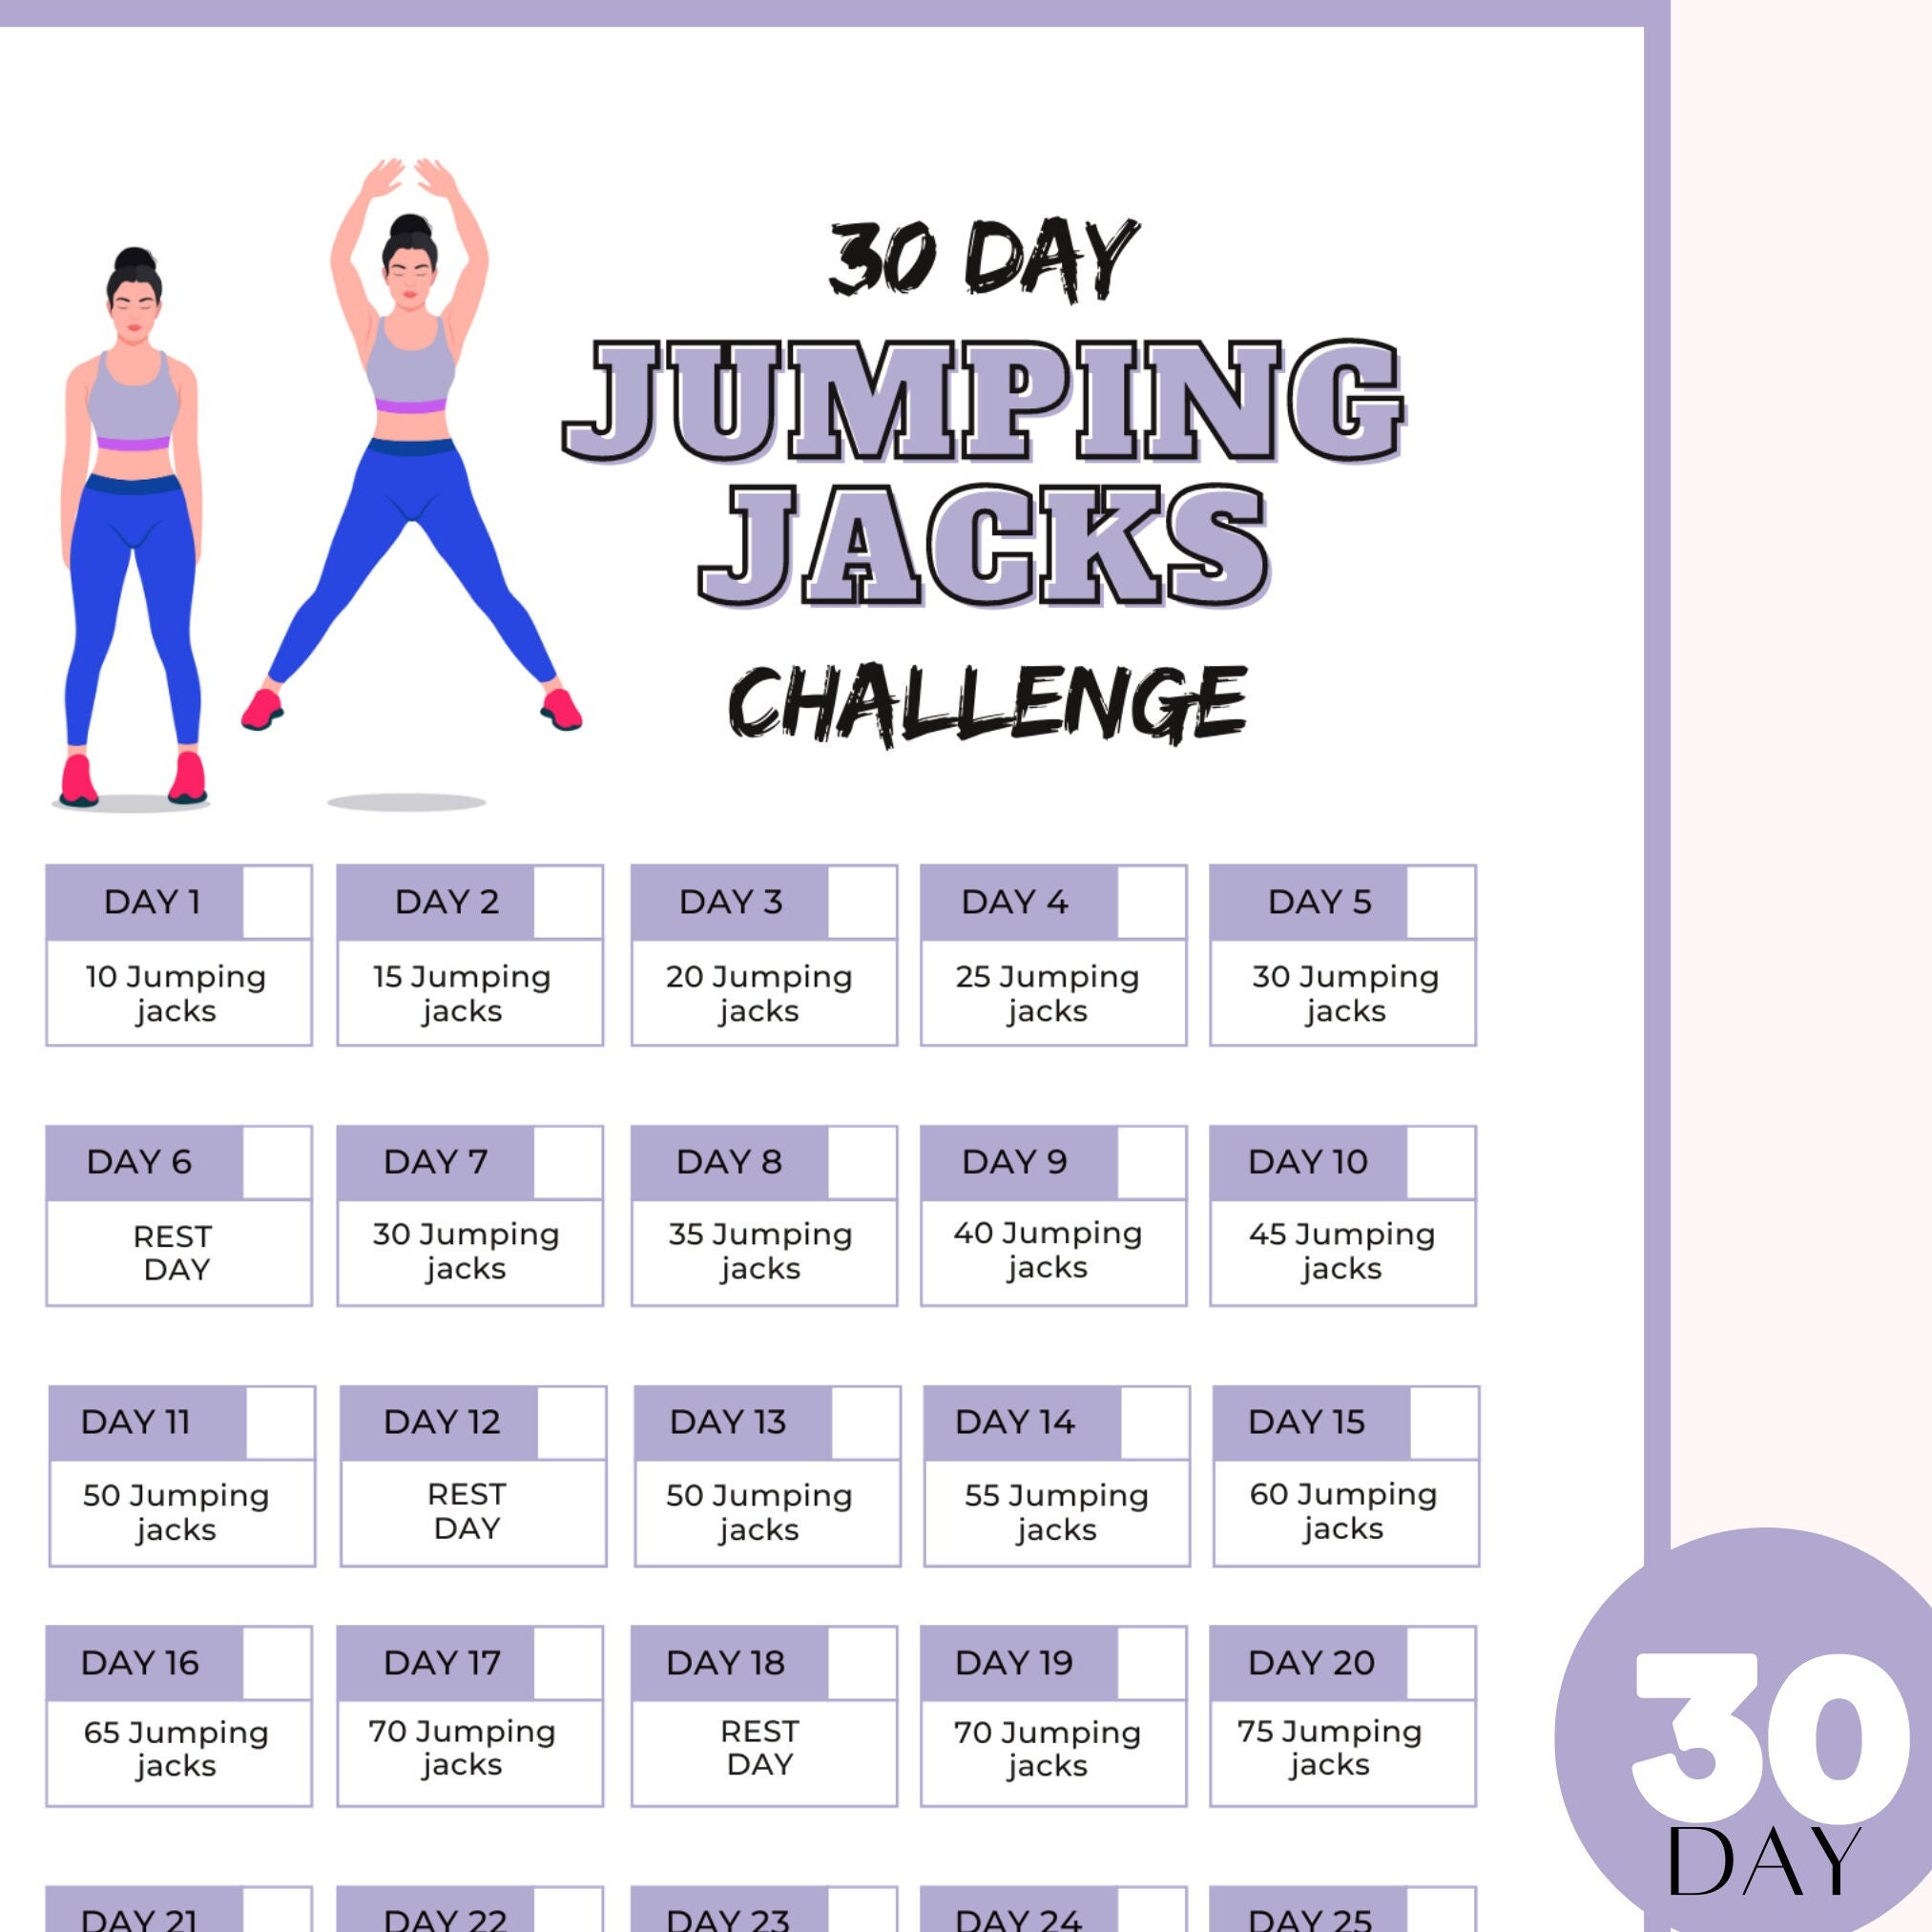 Your 30-day jumping jack challenge